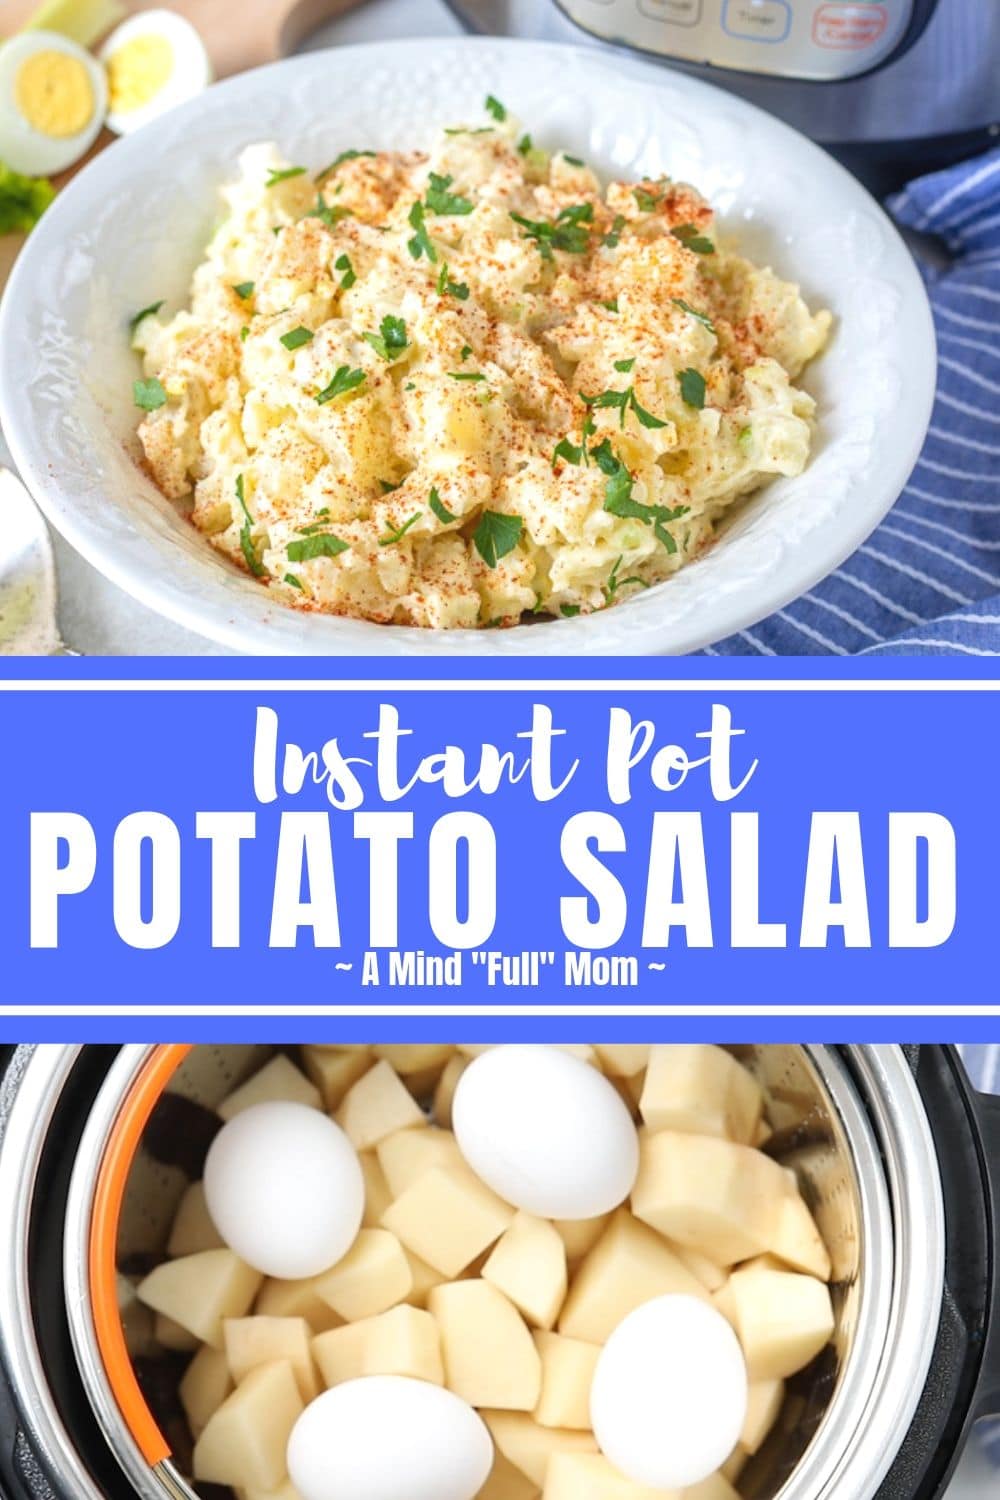 This Instant Pot Potato Salad makes making classic potato salad so much faster! By cooking the eggs and potatoes together perfectly in the pressure cooker, the prep time on potato salad has been cut drastically. Then the potatoes and eggs are tossed together with a classic mayonnaise-based dressing for an out-of-this-world, creamy potato salad.